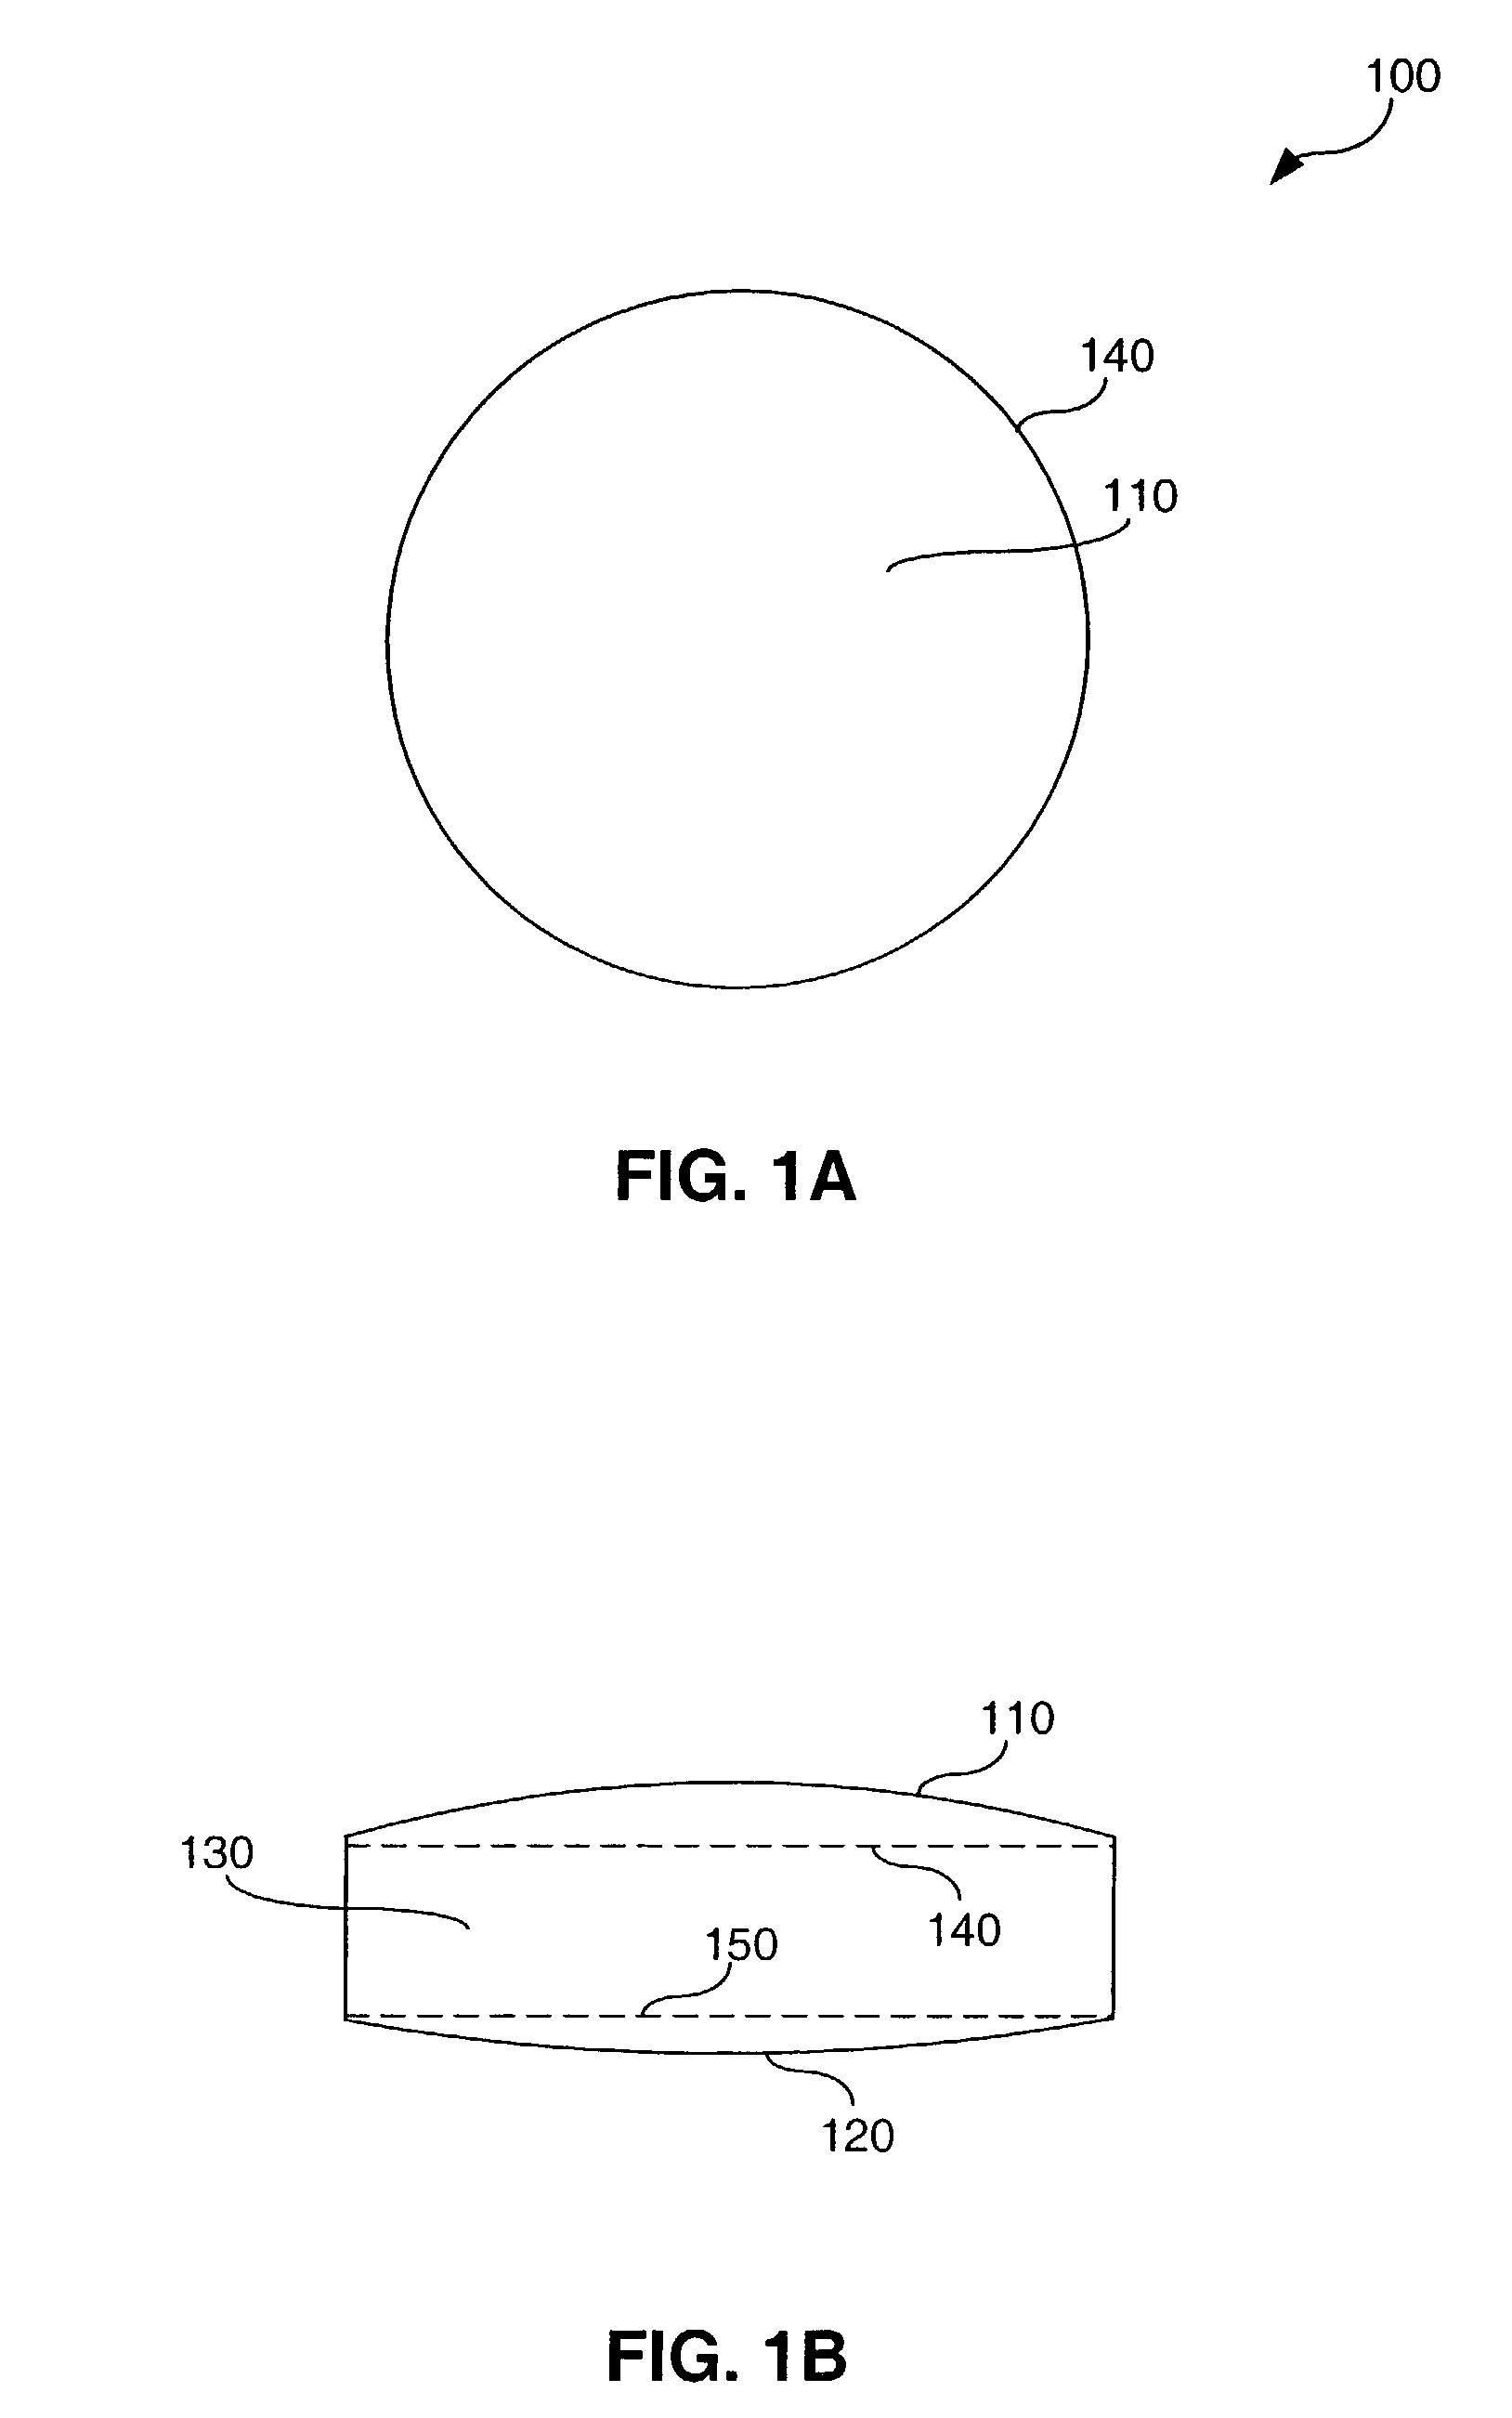 Method for protection of adhesives used to secure optics from ultra-violet light